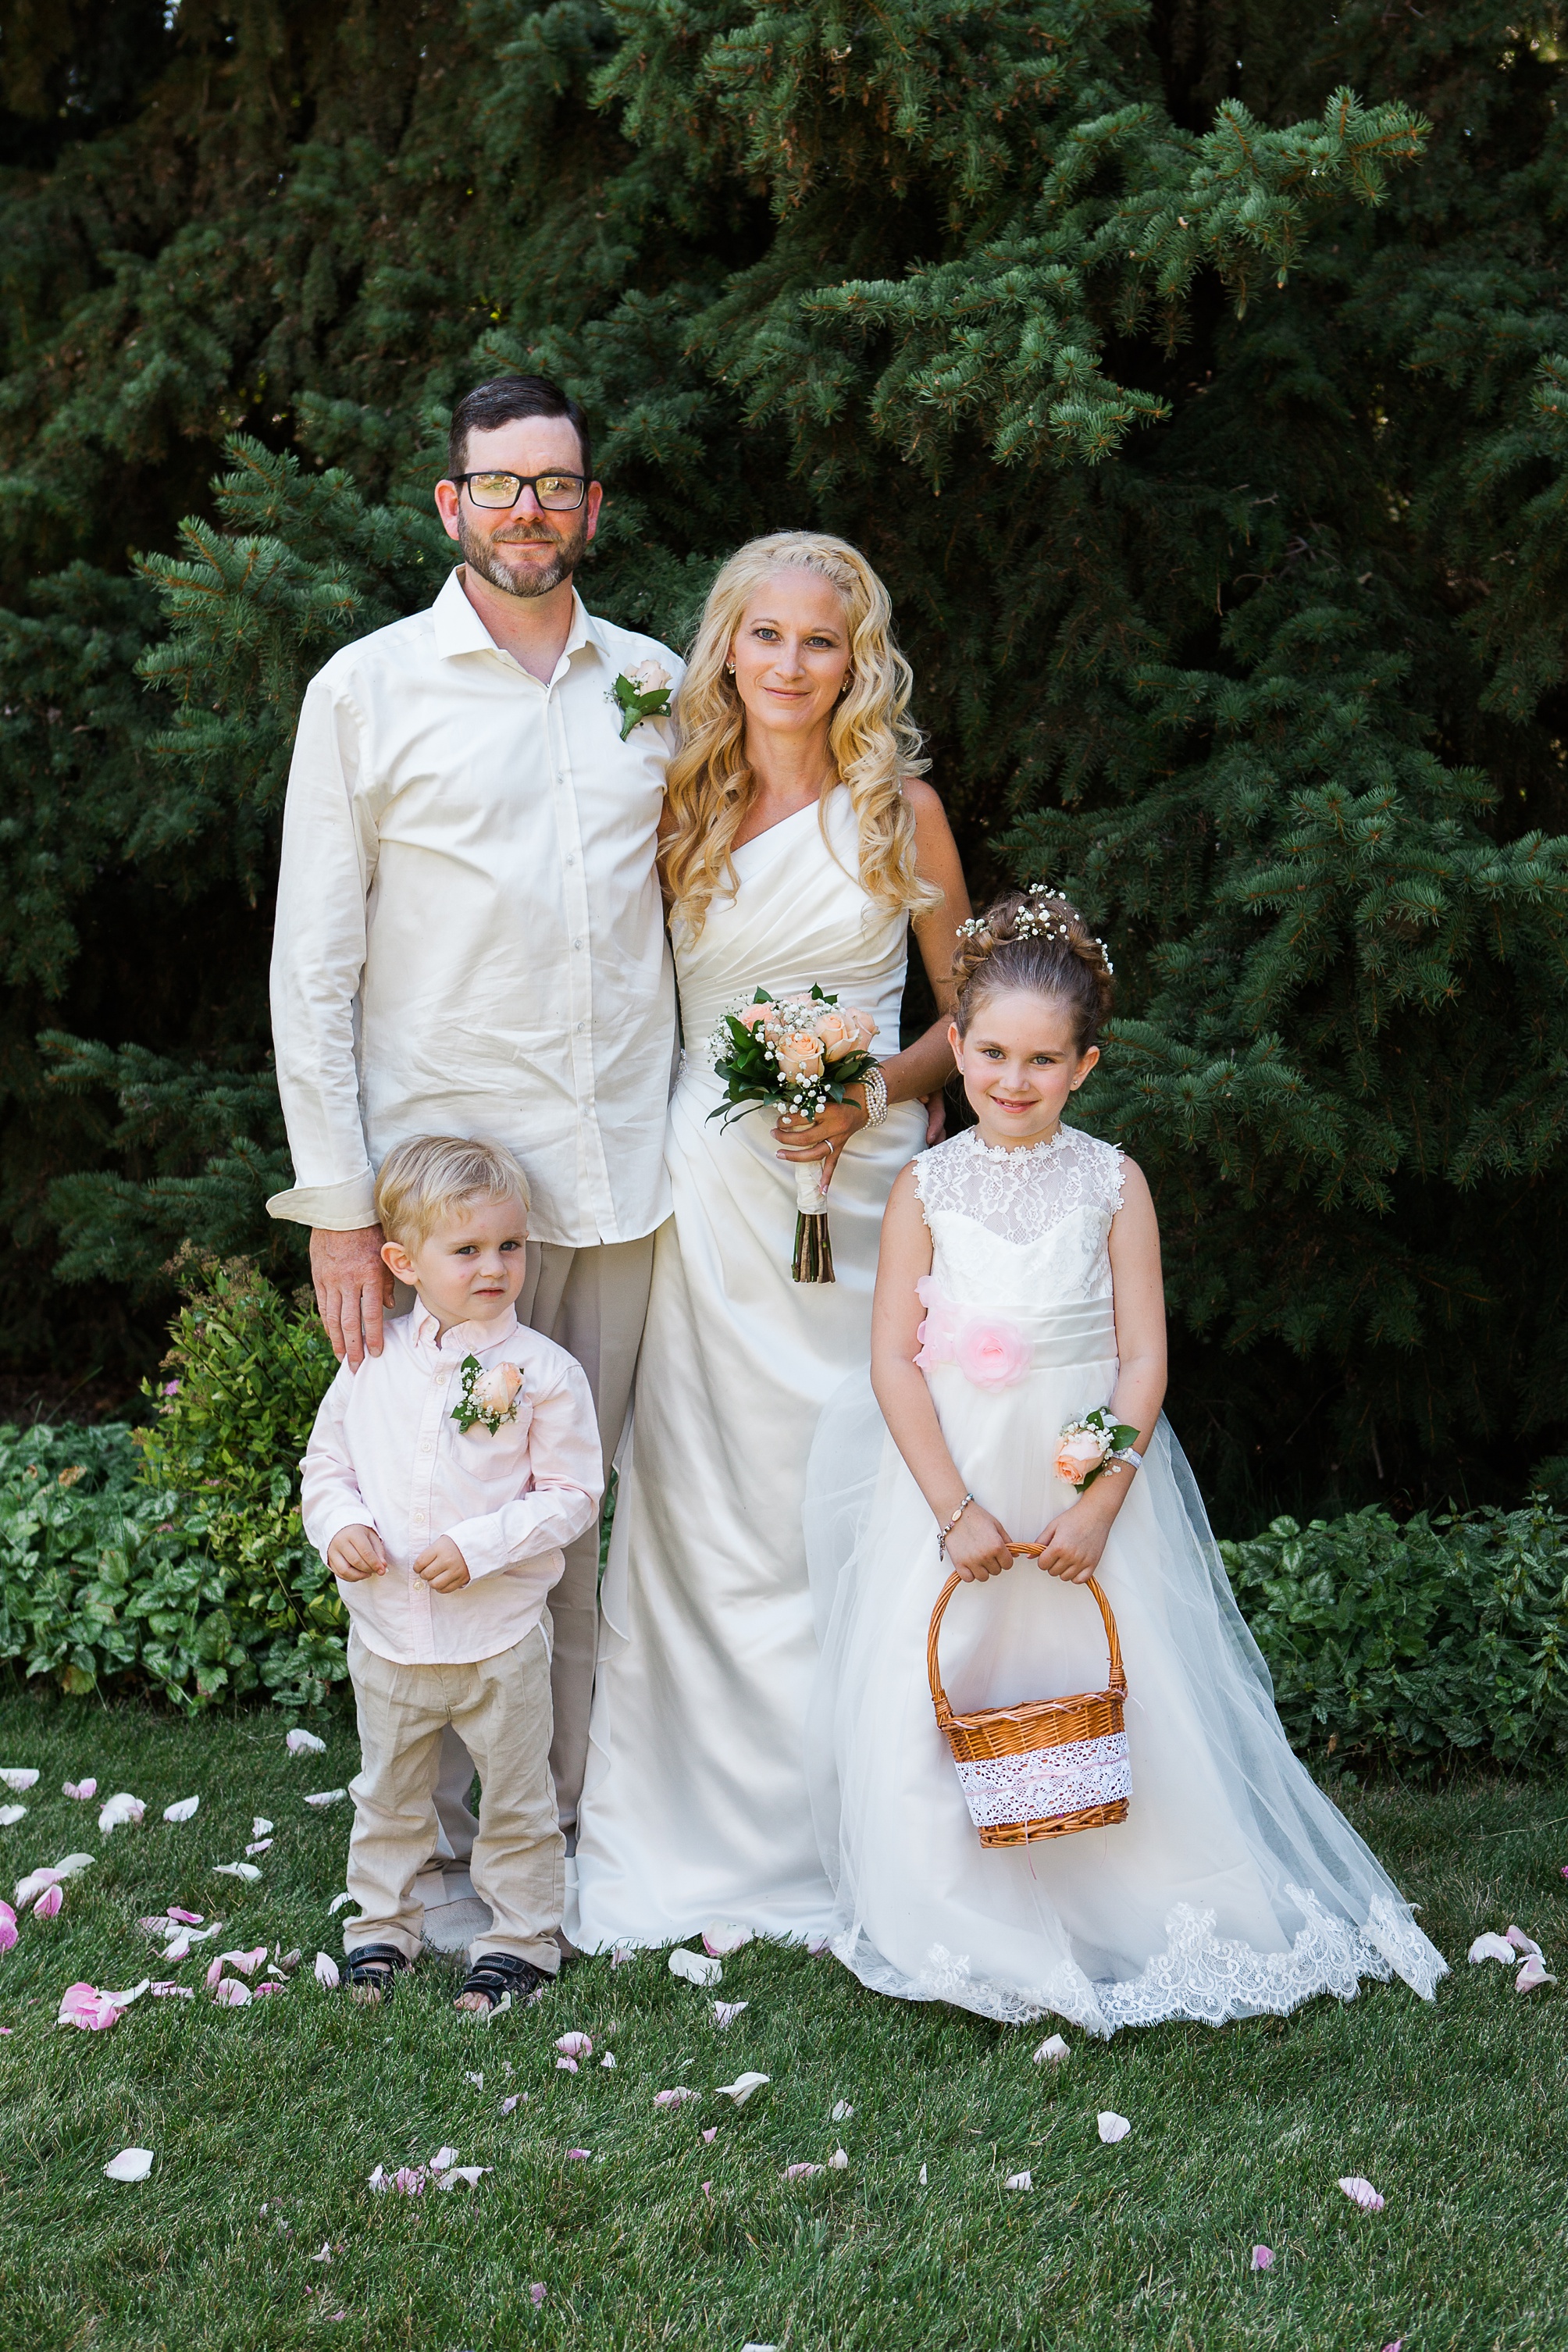 Family photos at this Casual pink and white backyard wedding 